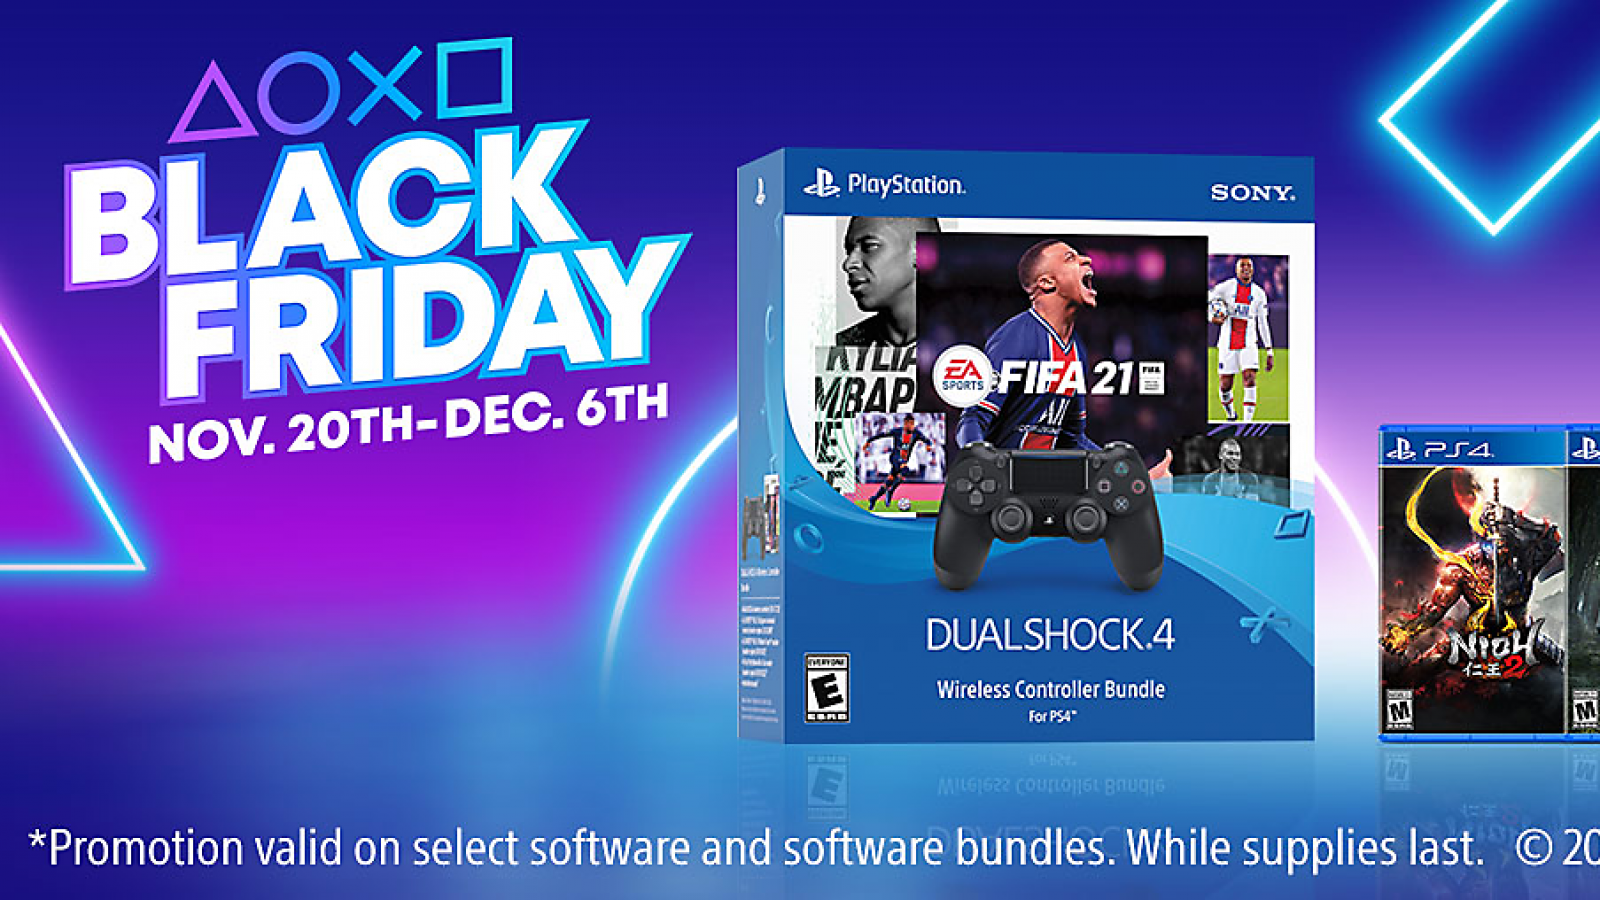 Black Friday PlayStation deals for 2017 announced - Polygon